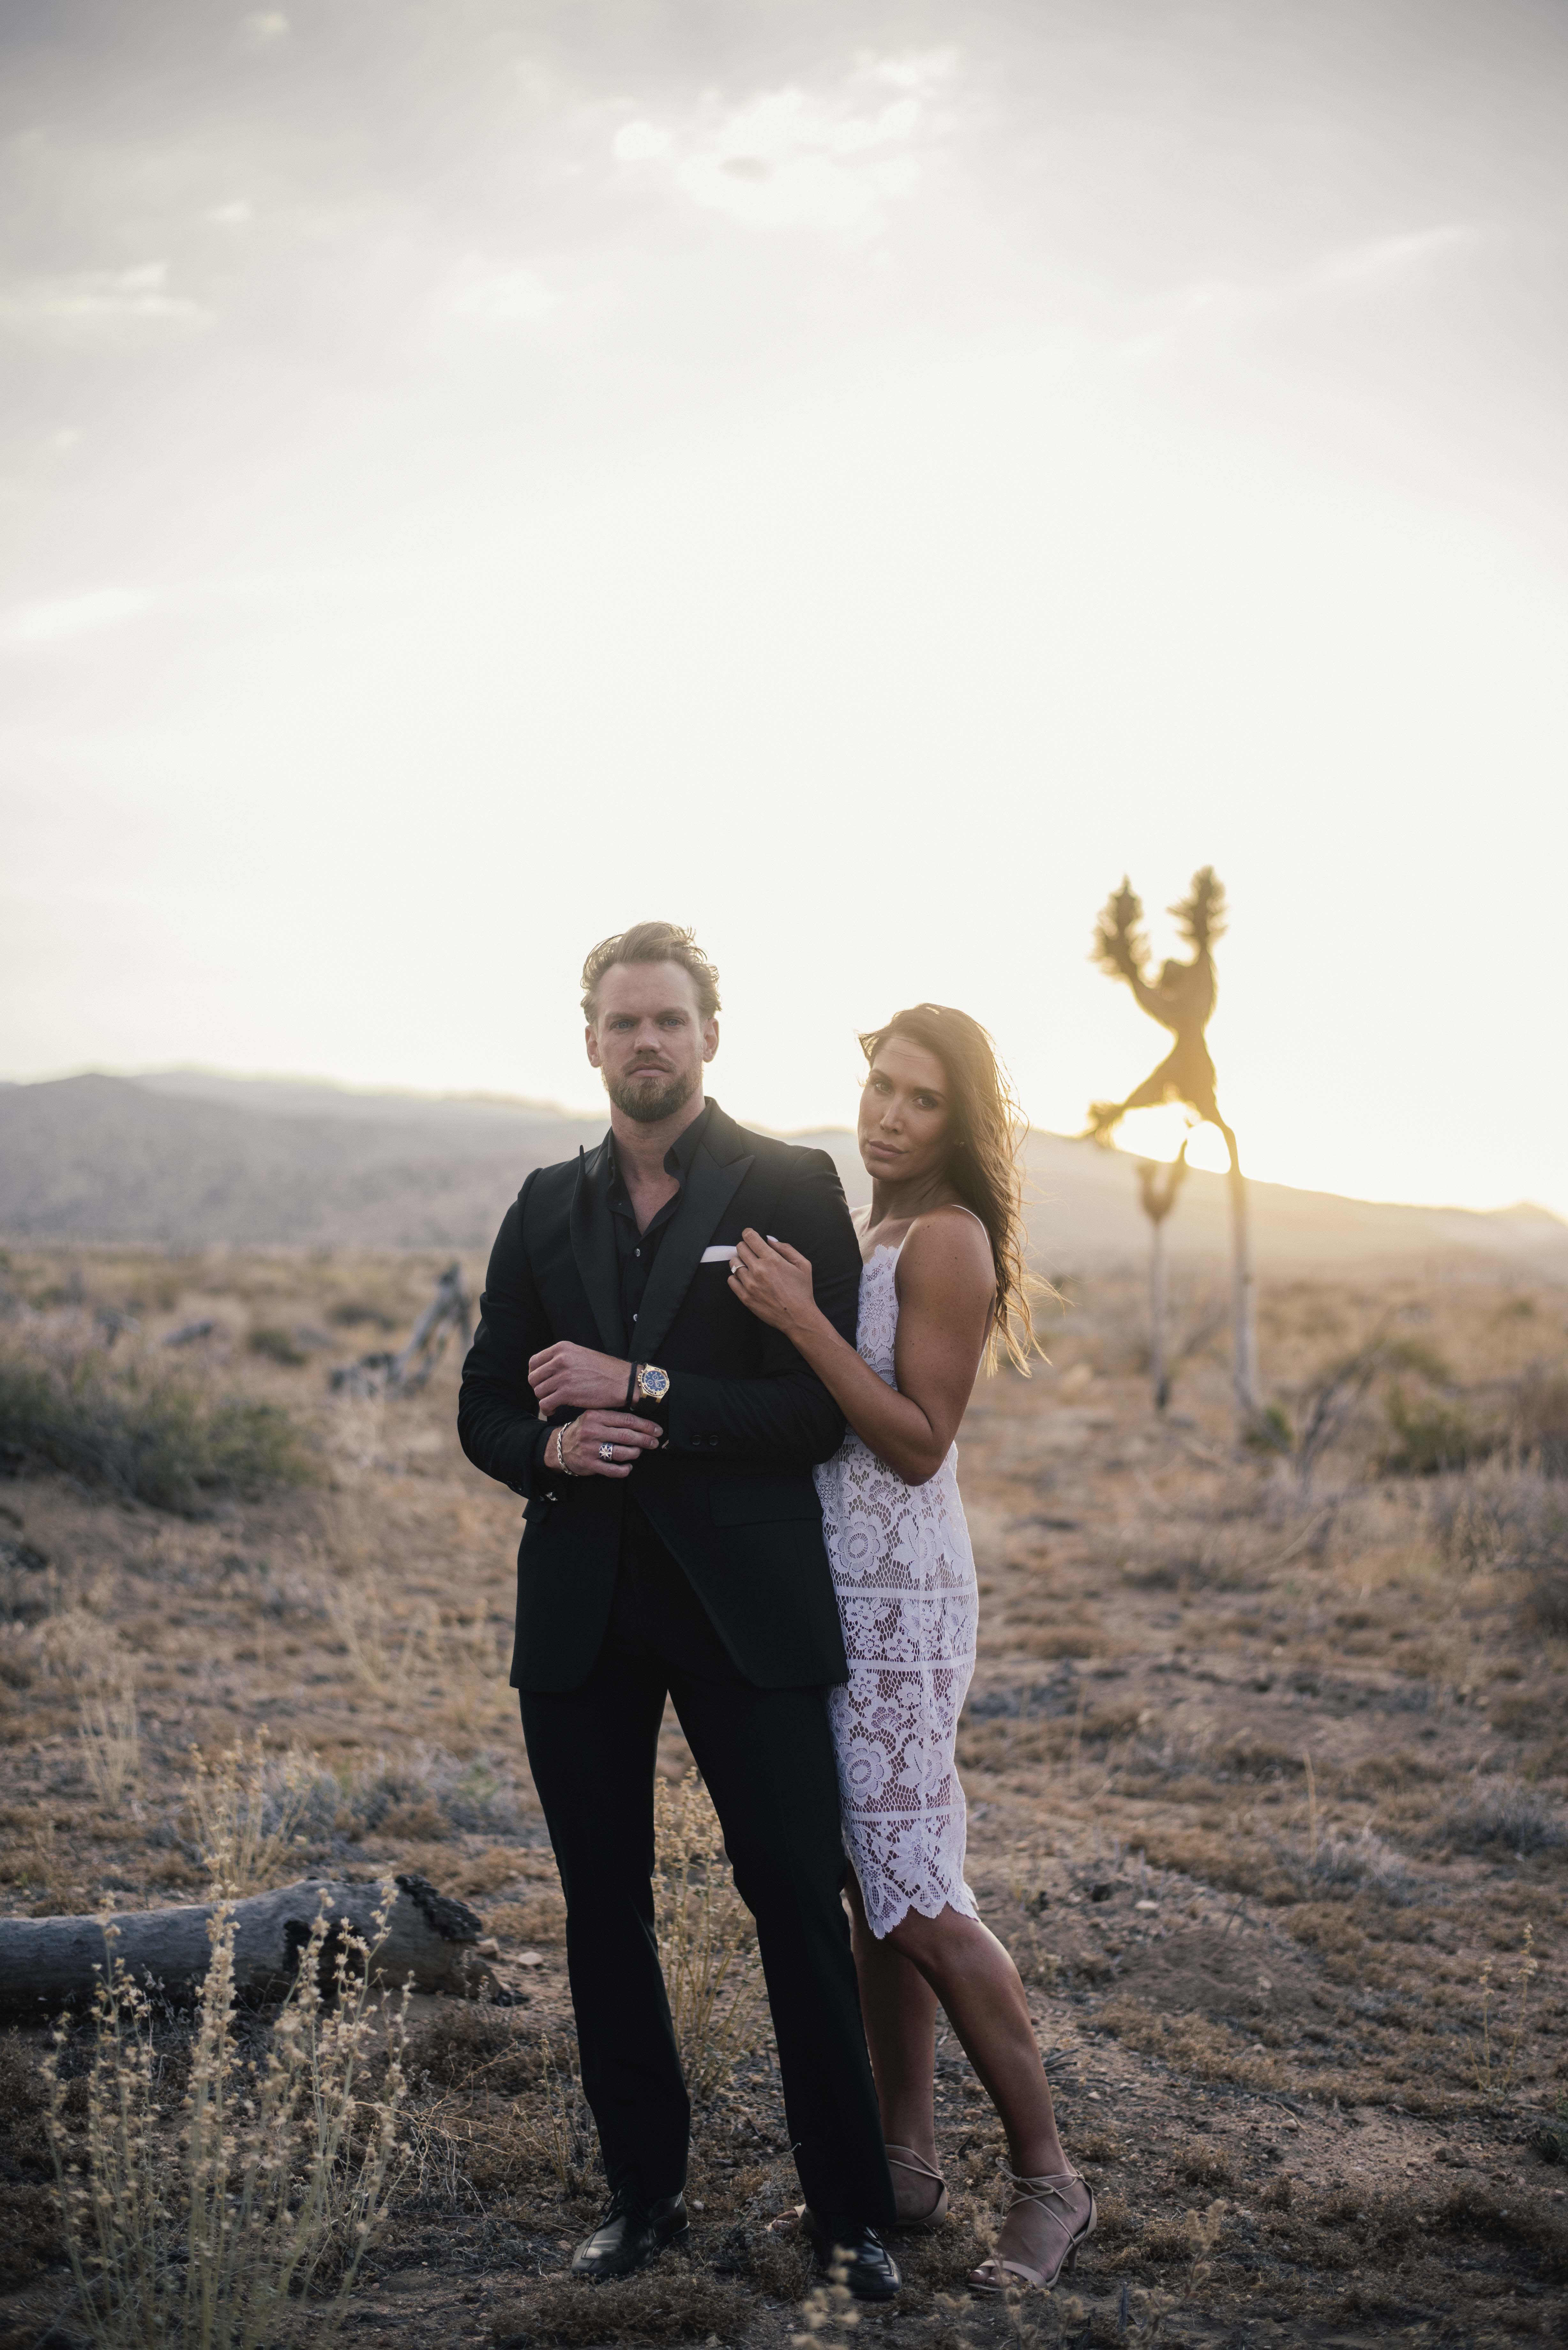 A Pioneertown Engagement Session